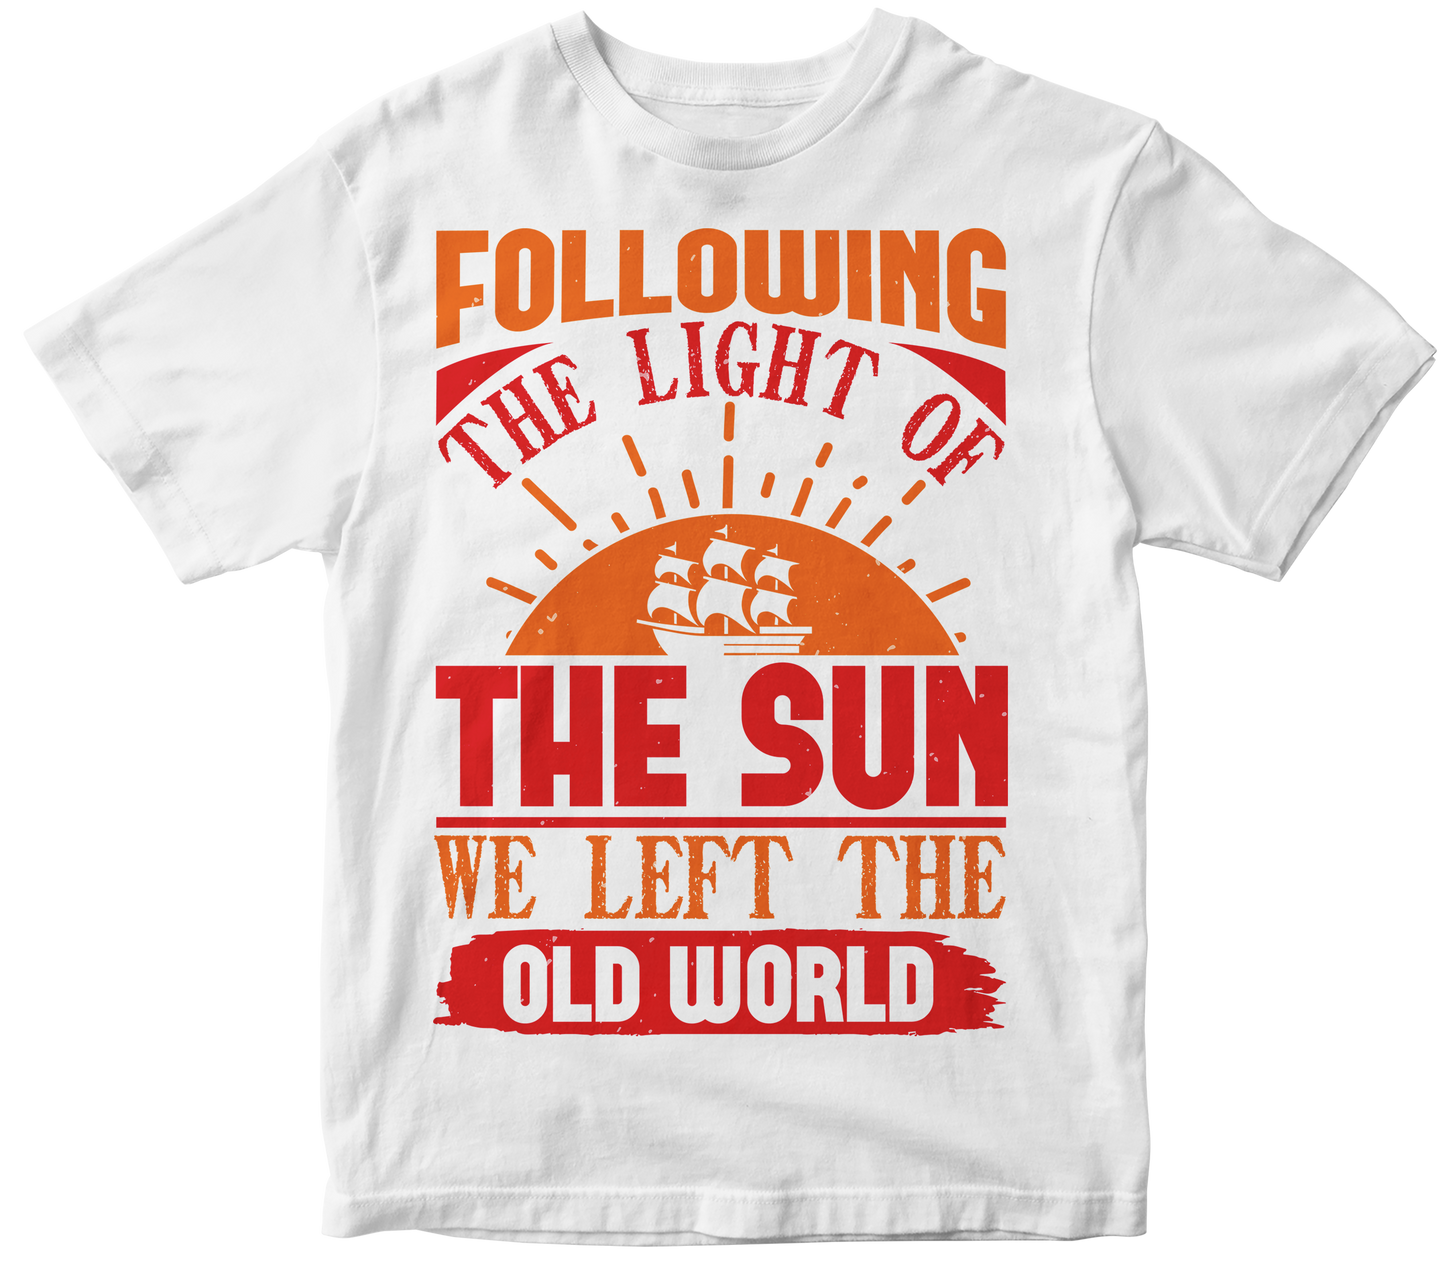 Following the light of the sun we left the Old World